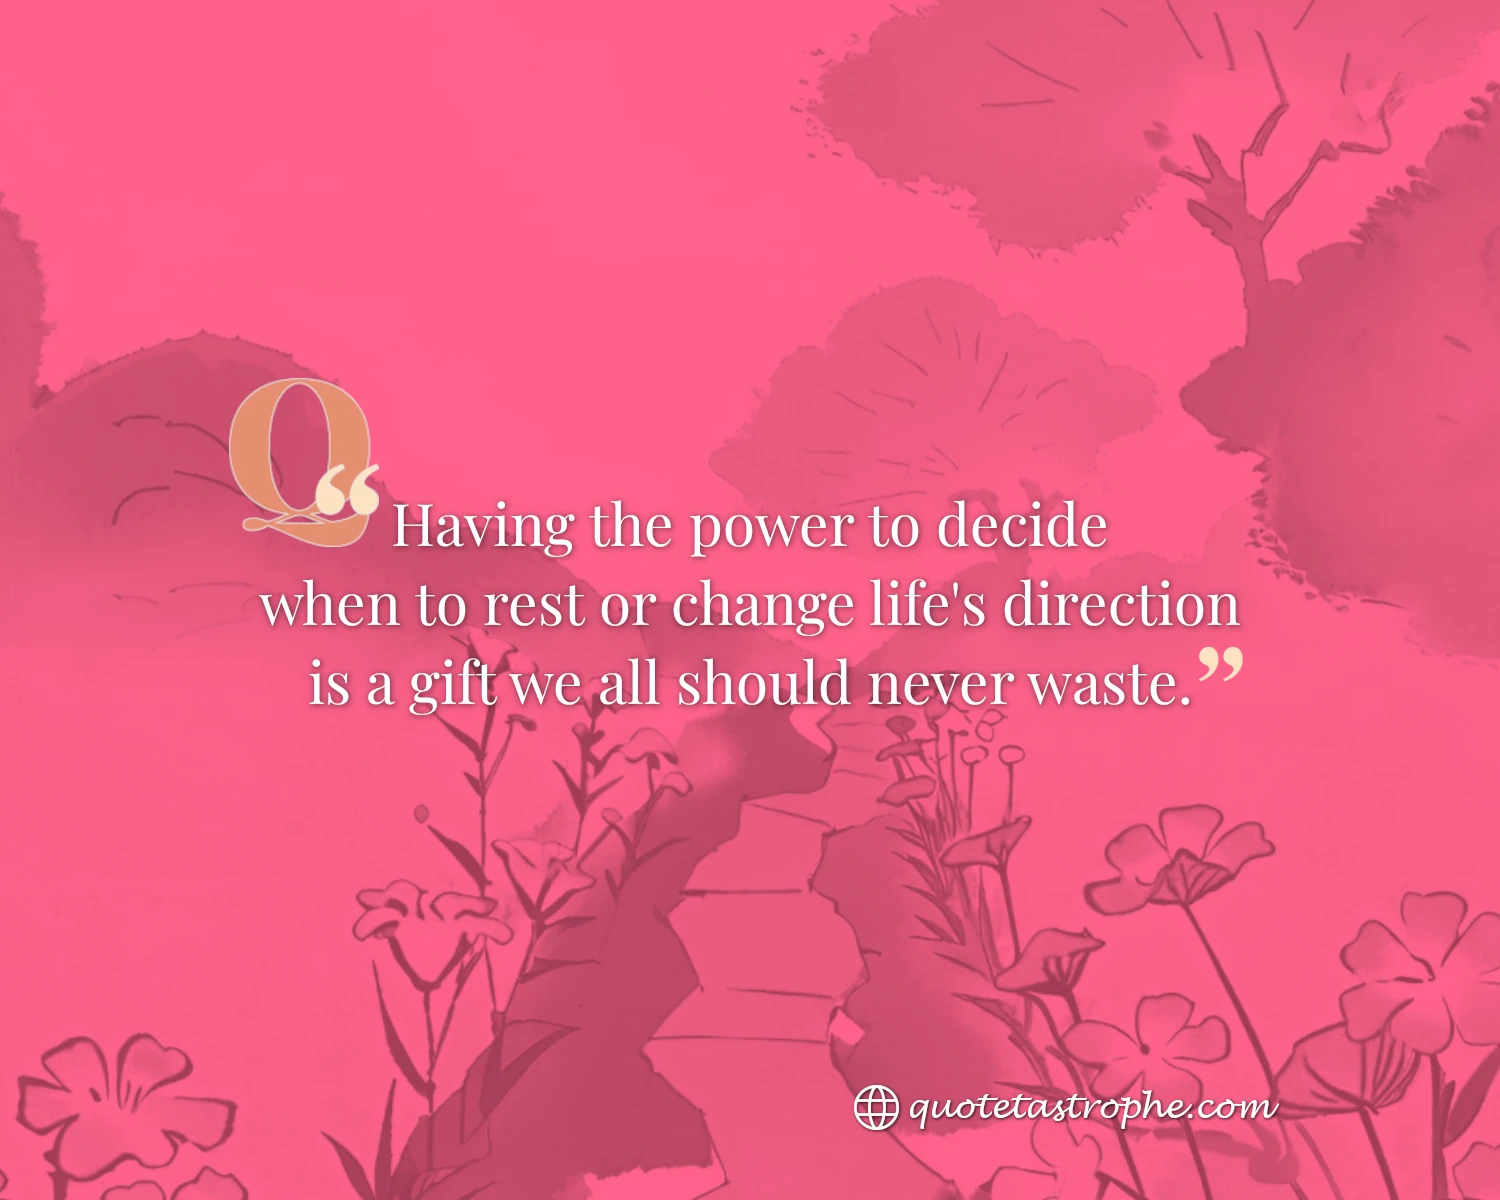 Having The Power To Decide When To Change Life is a Gift